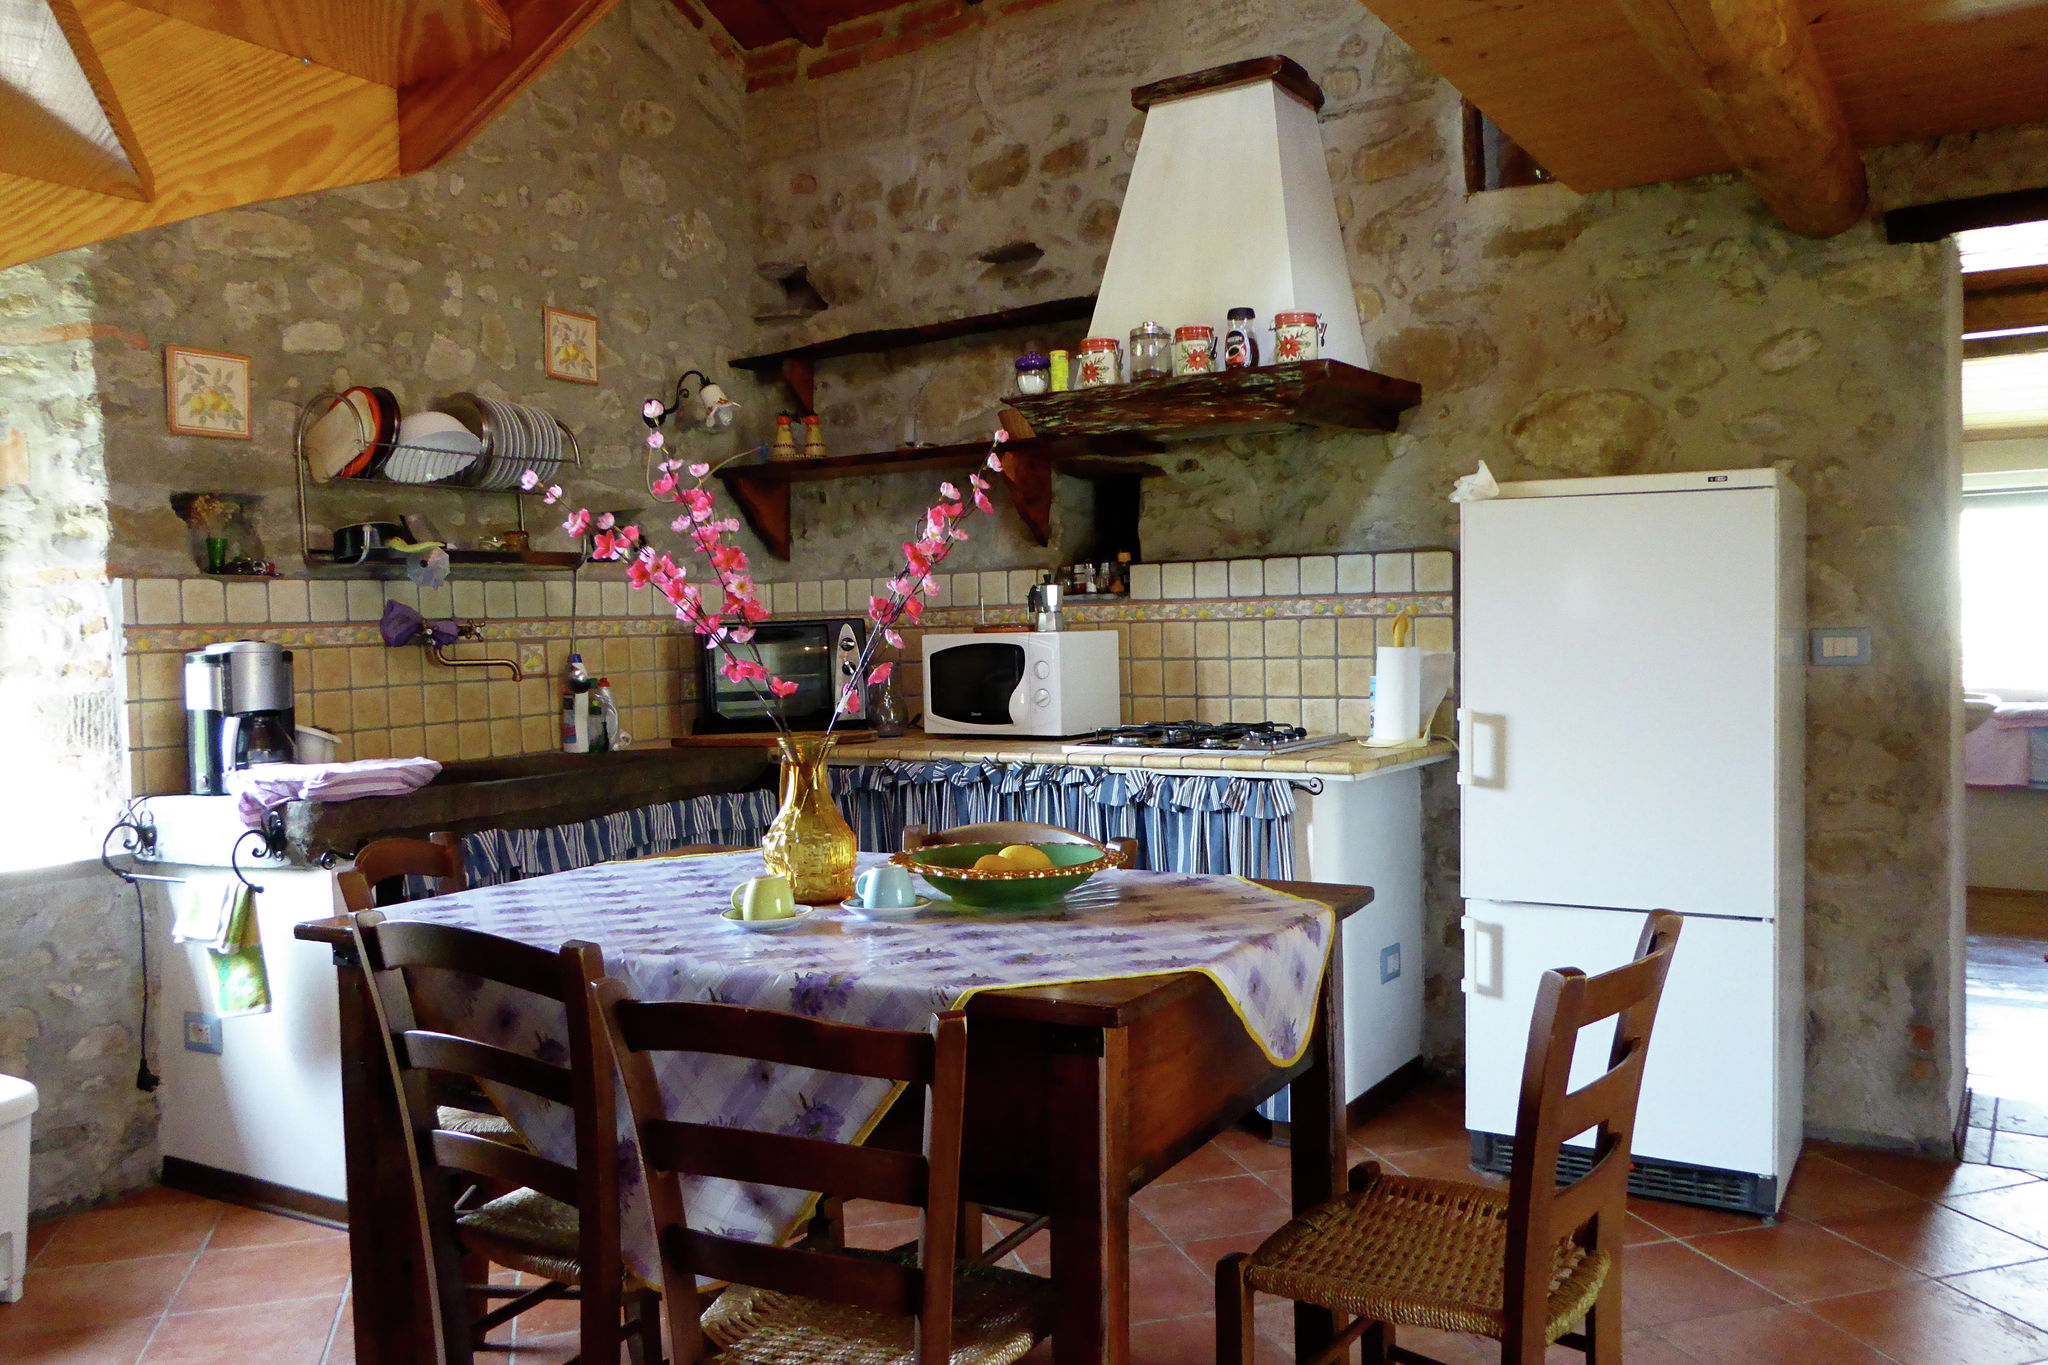 Charming detached house in Lucca province.